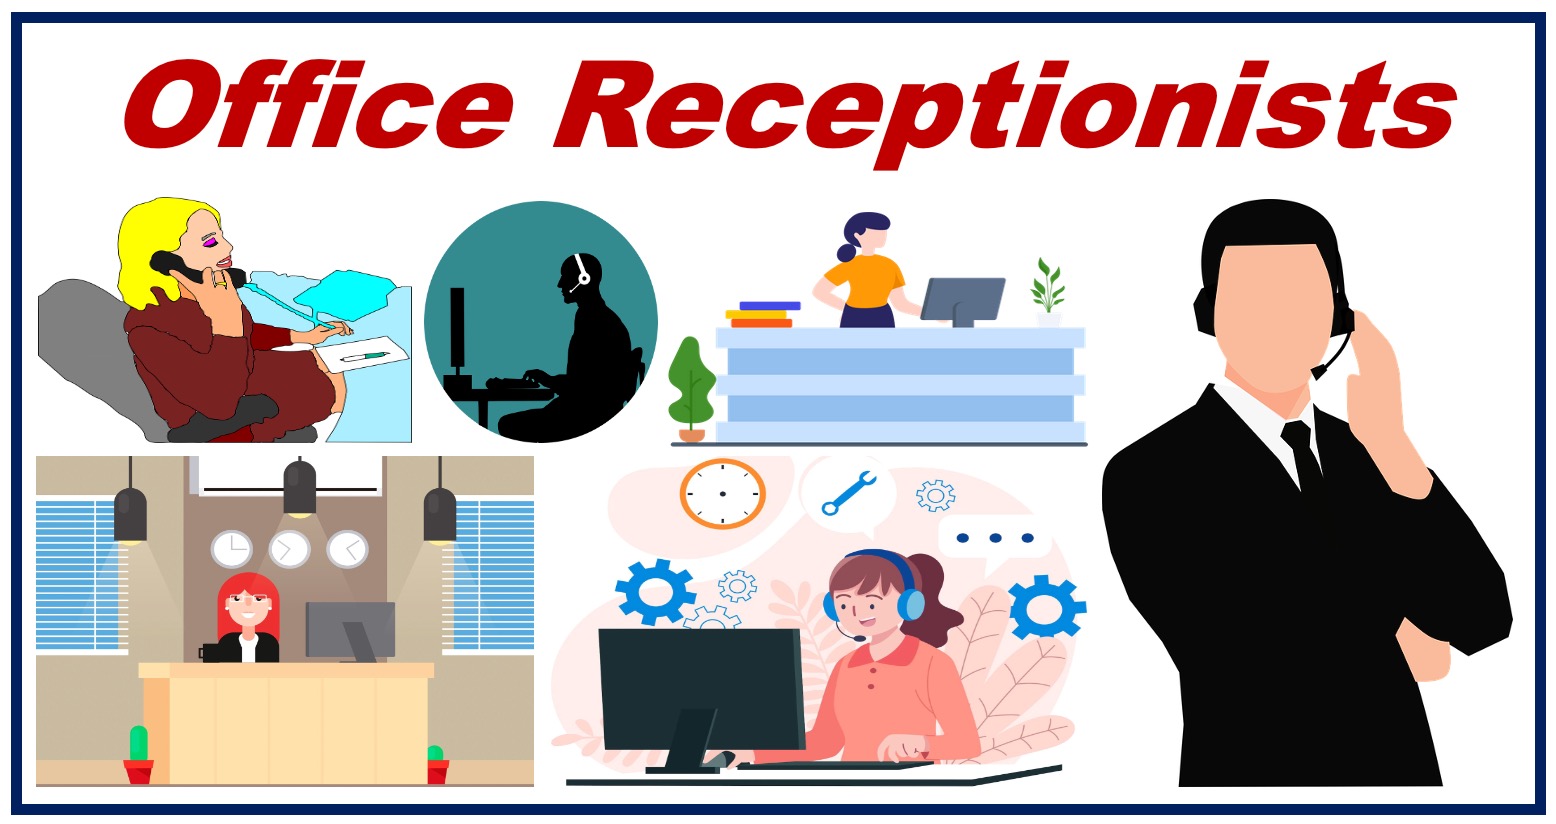 Office Receptionists